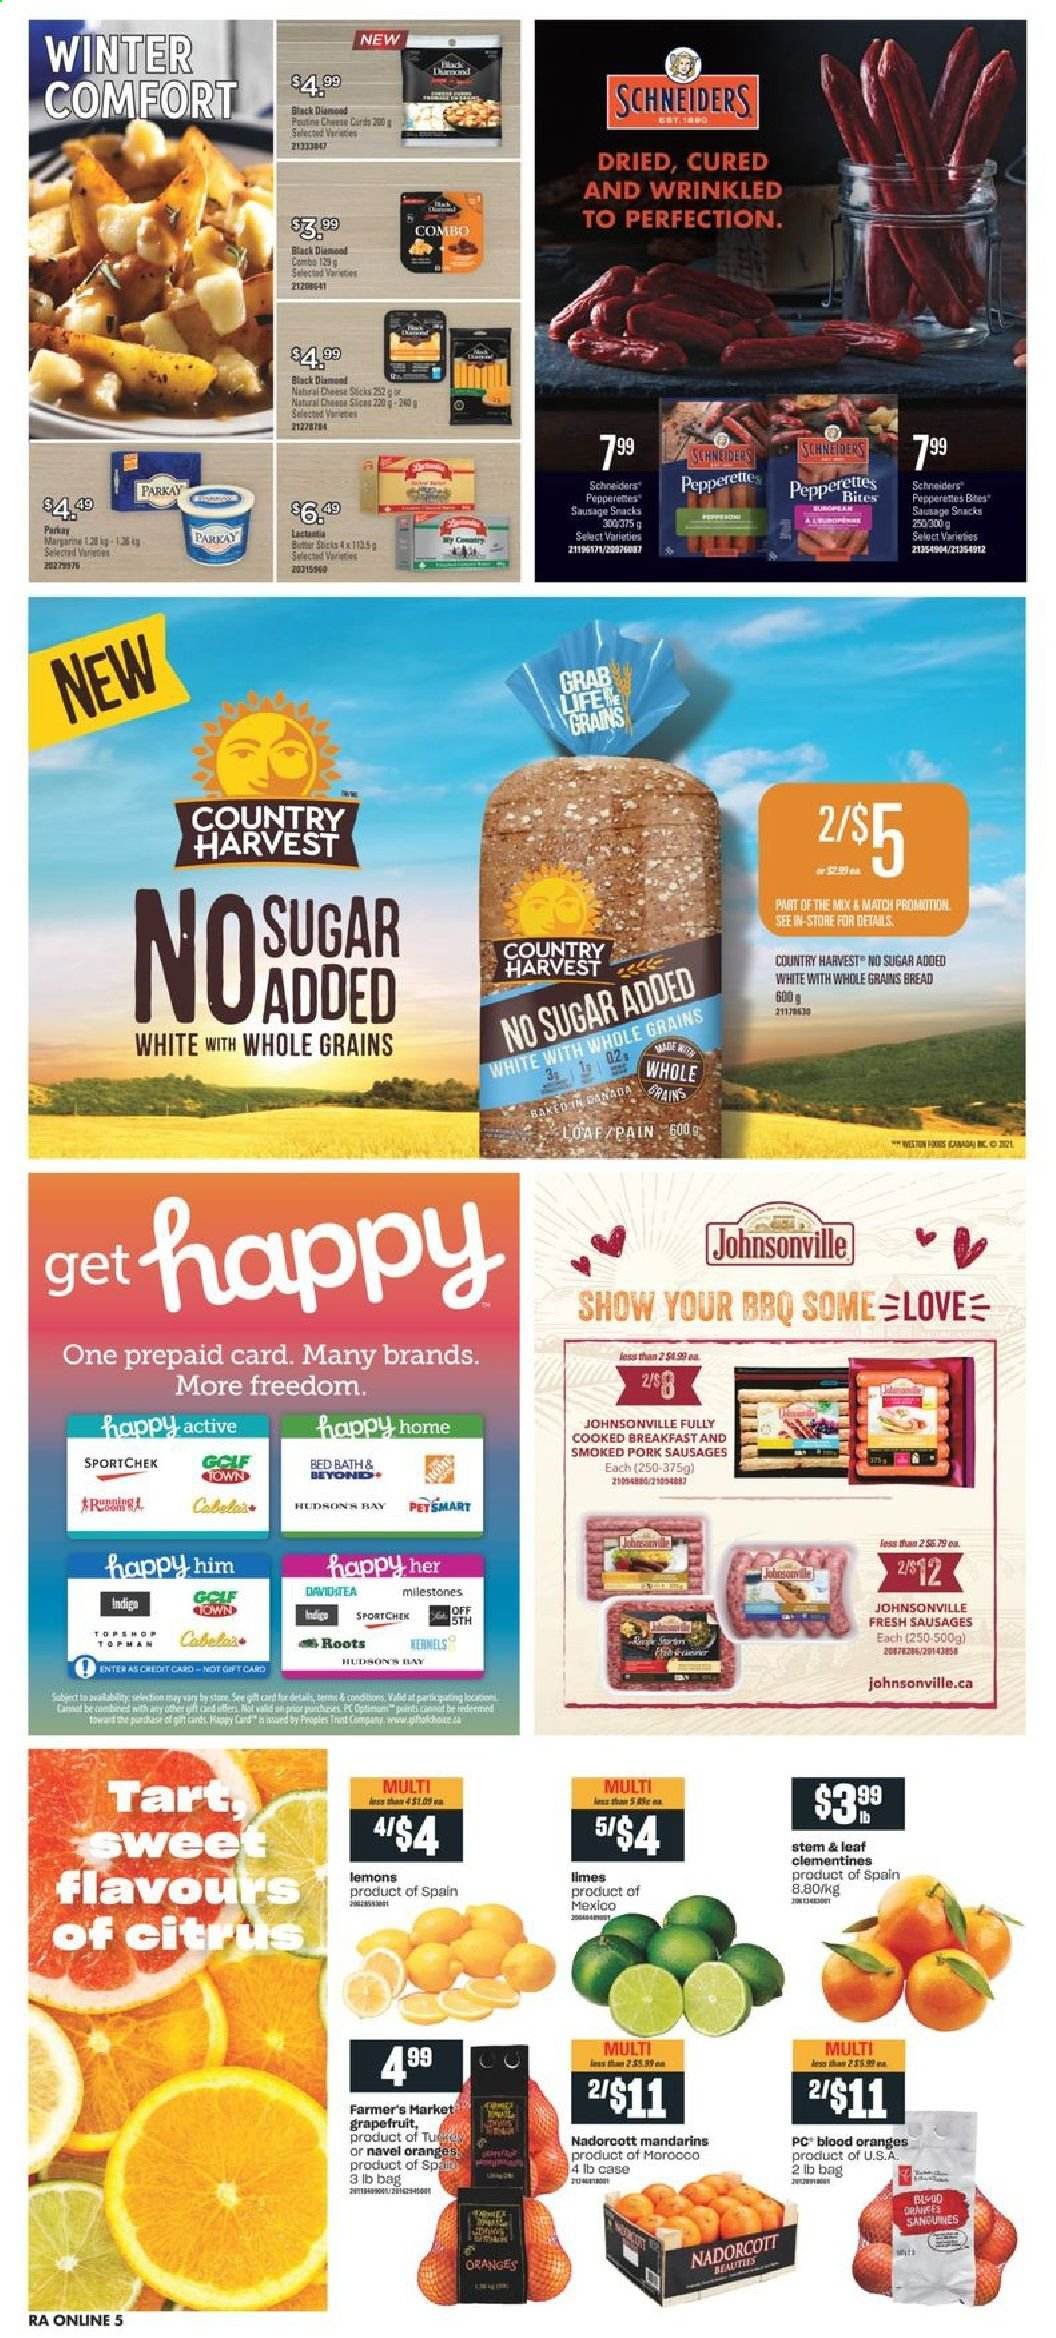 Atlantic Superstore flyer  - February 11, 2021 - February 17, 2021. Page 9.